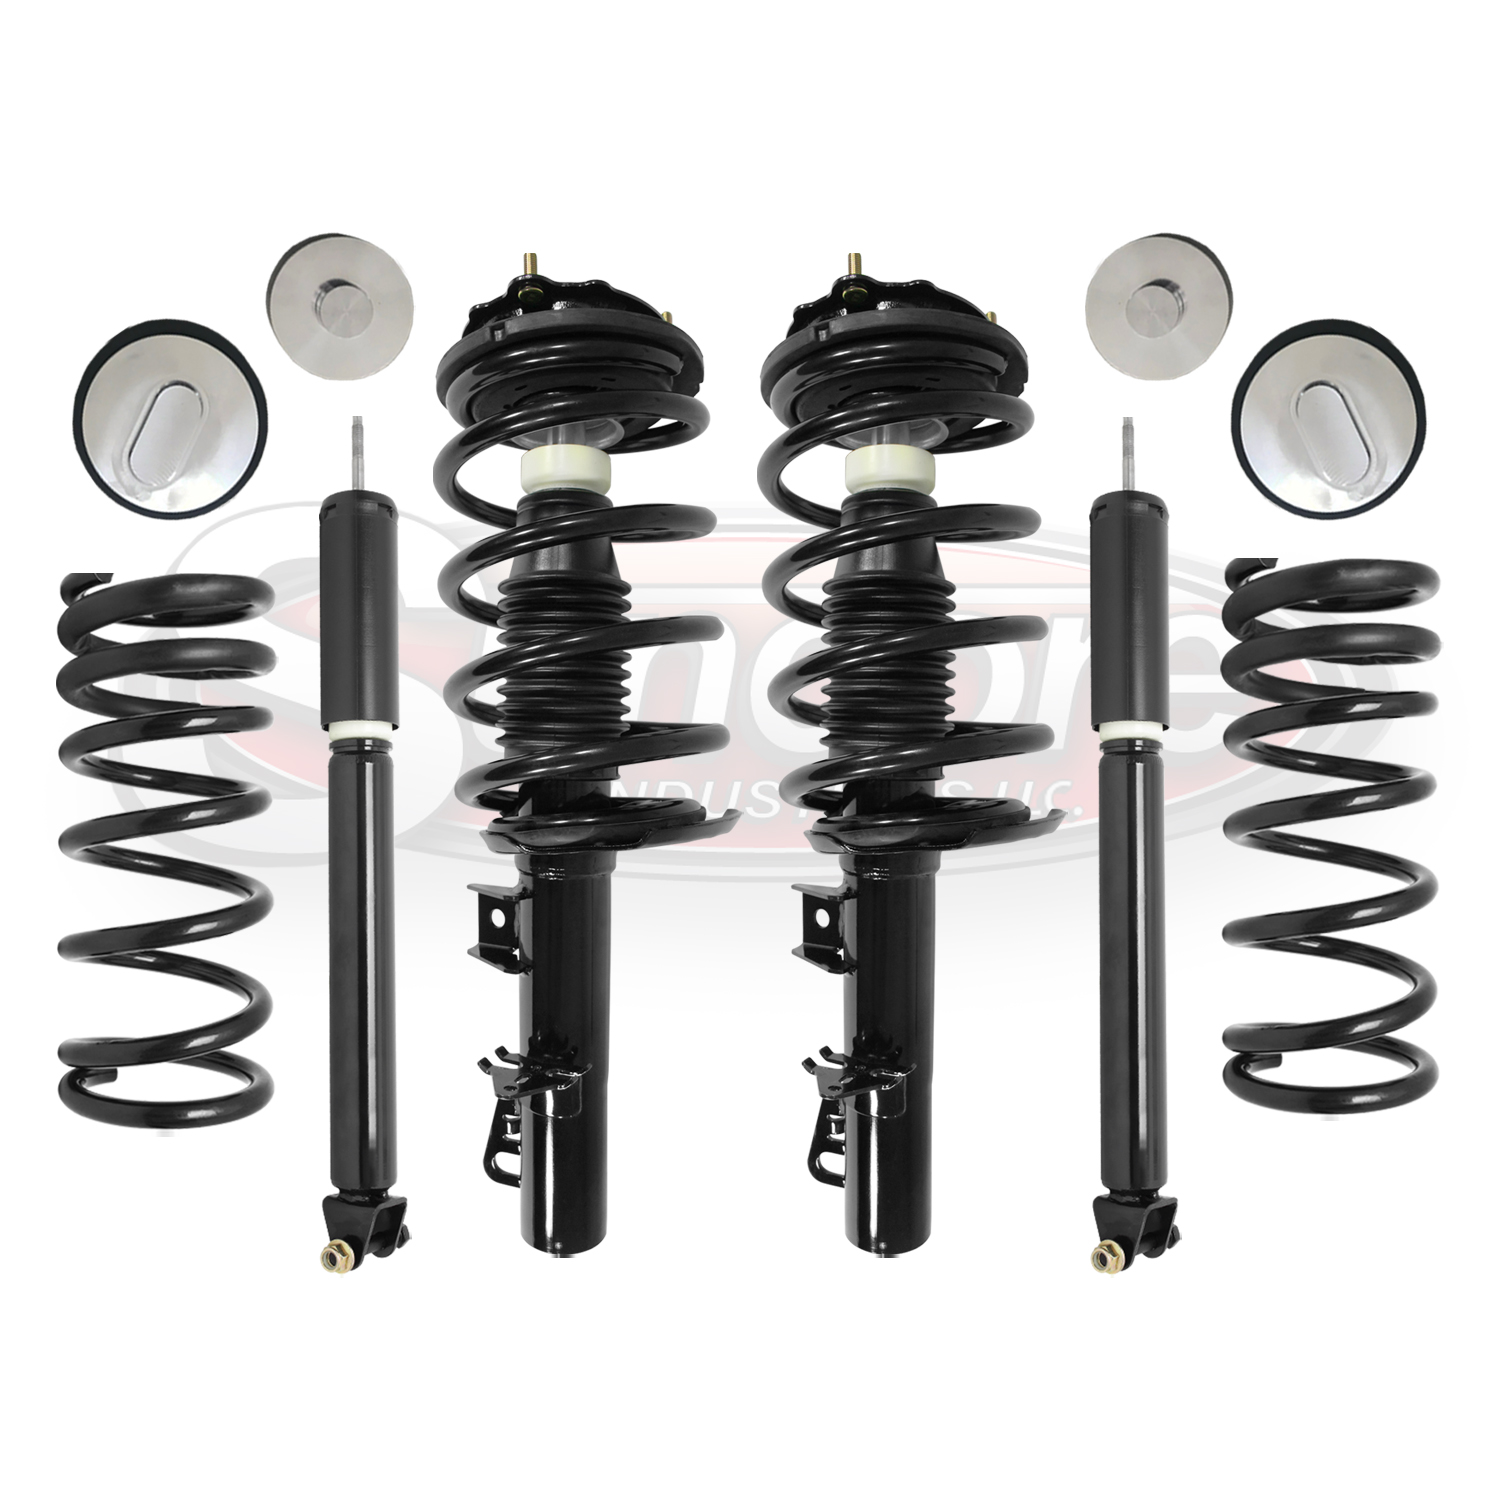 Air Suspension Conversion Kit to Coil Springs and Struts with Gas Shocks Bundle - Lincoln Continental